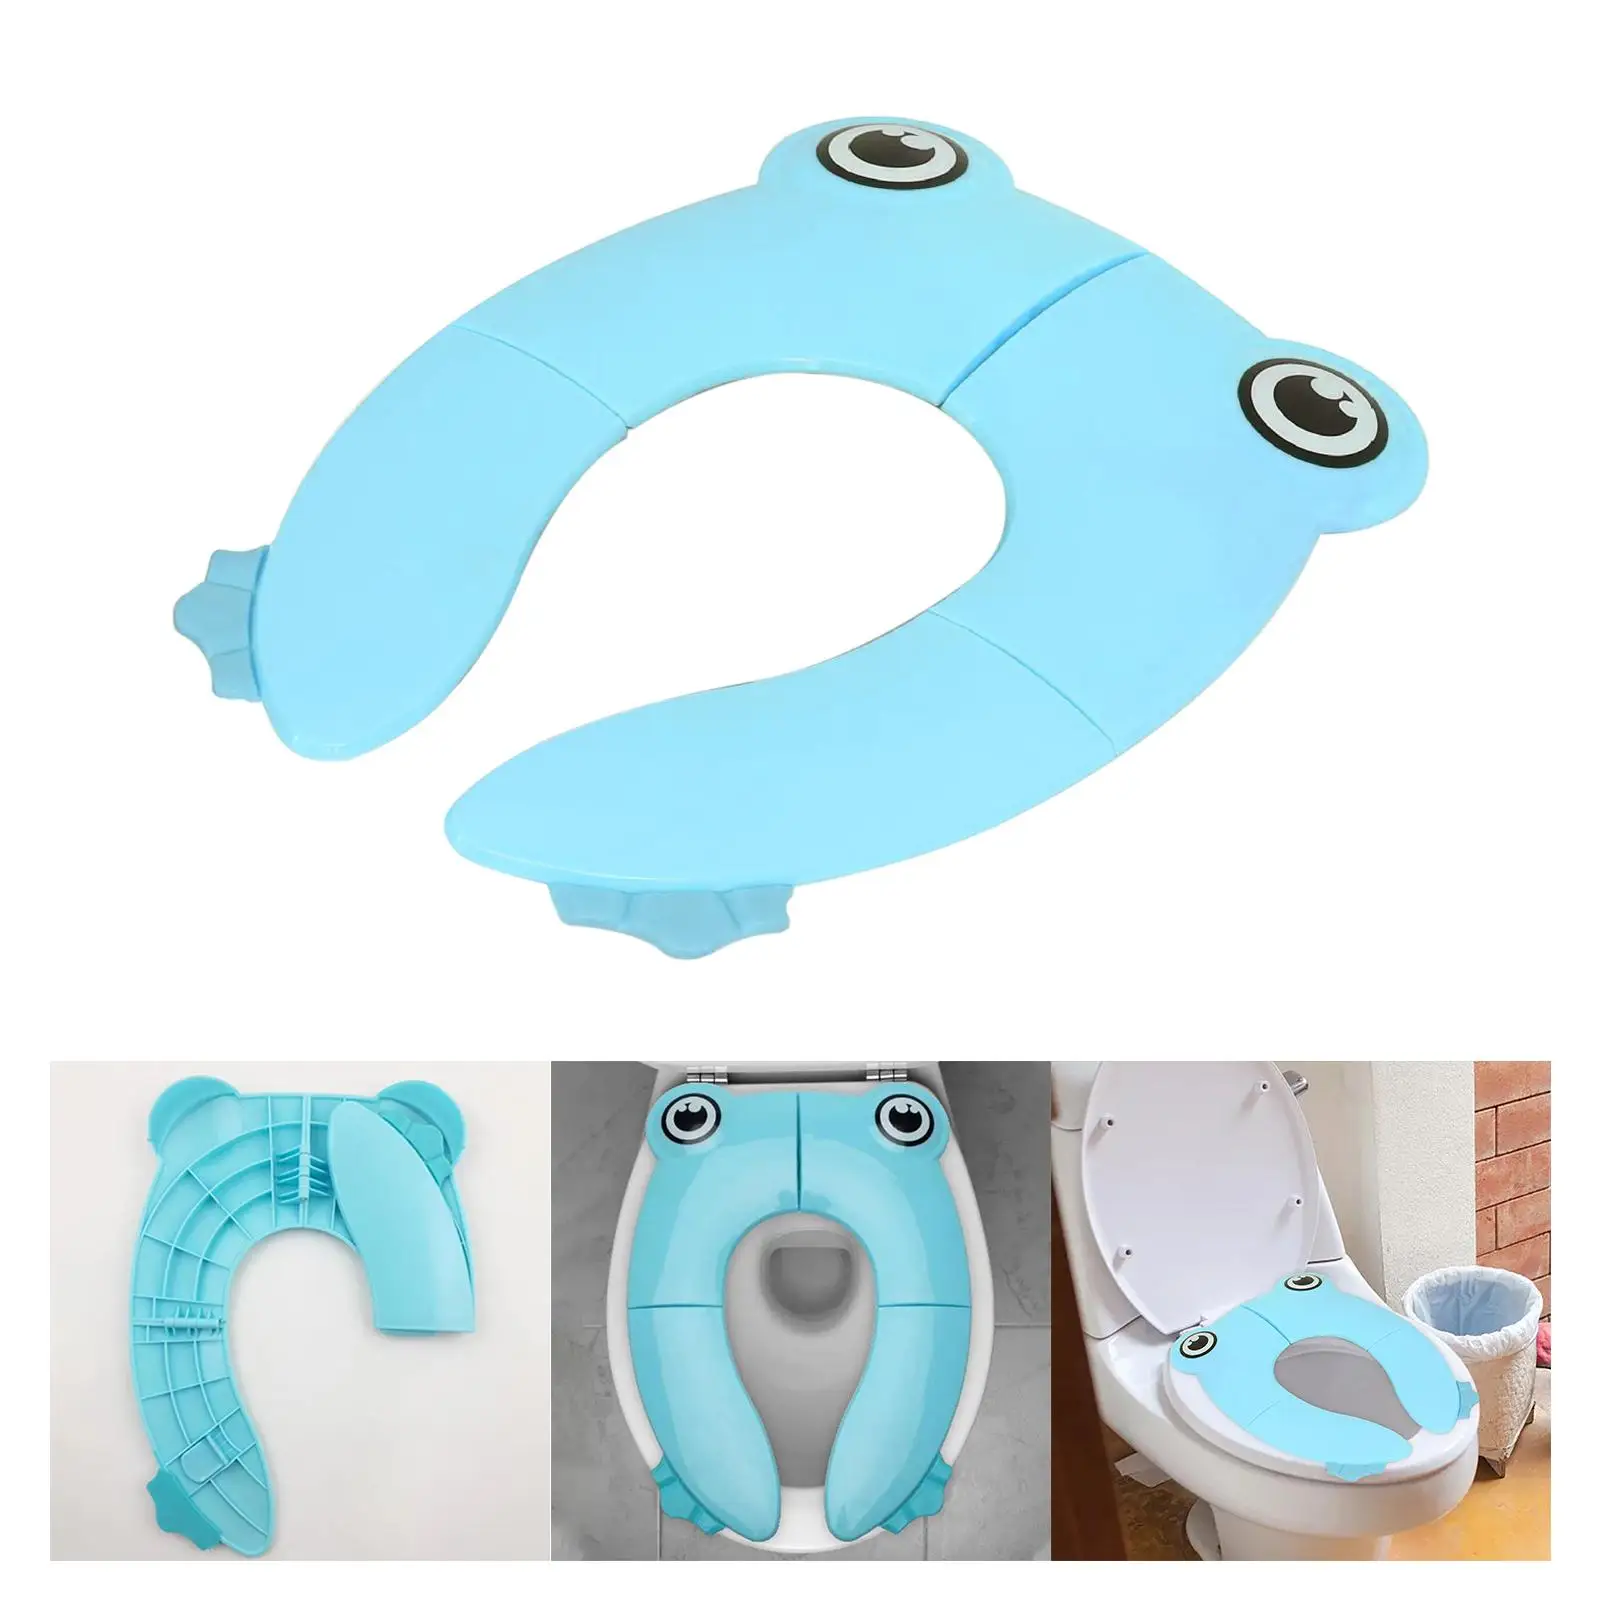 Toilet Cover Folding Practical Potty Seat Pads for Camping Home Use Toddler